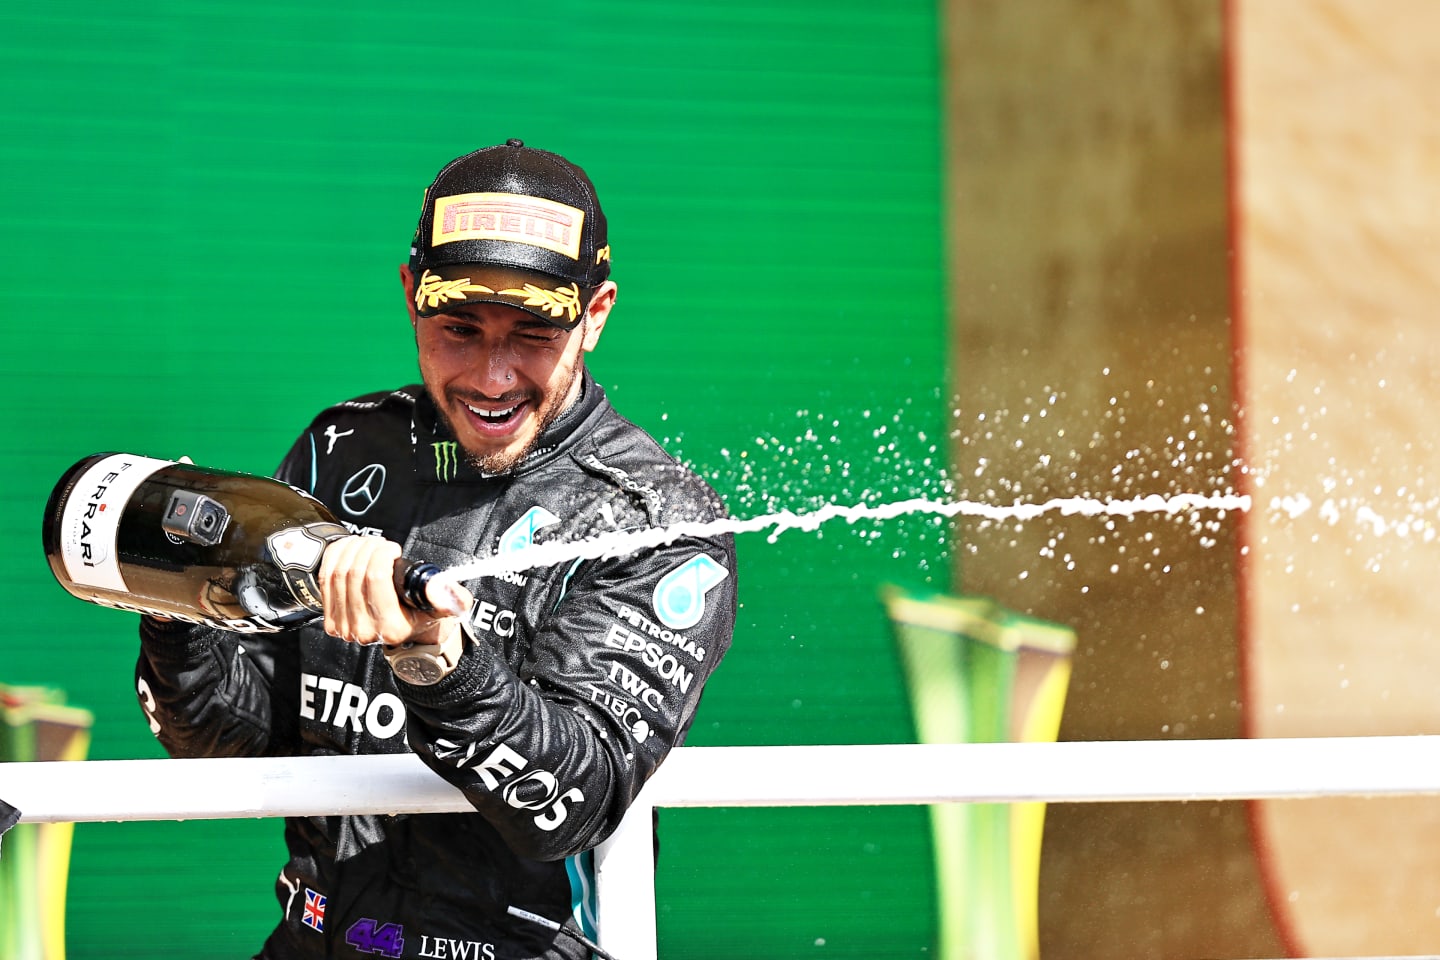 SAO PAULO, BRAZIL - NOVEMBER 14: Race winner Lewis Hamilton of Great Britain and Mercedes GP celebrates on the podium with sparkling wine during the F1 Grand Prix of Brazil at Autodromo Jose Carlos Pace on November 14, 2021 in Sao Paulo, Brazil. (Photo by Buda Mendes/Getty Images)